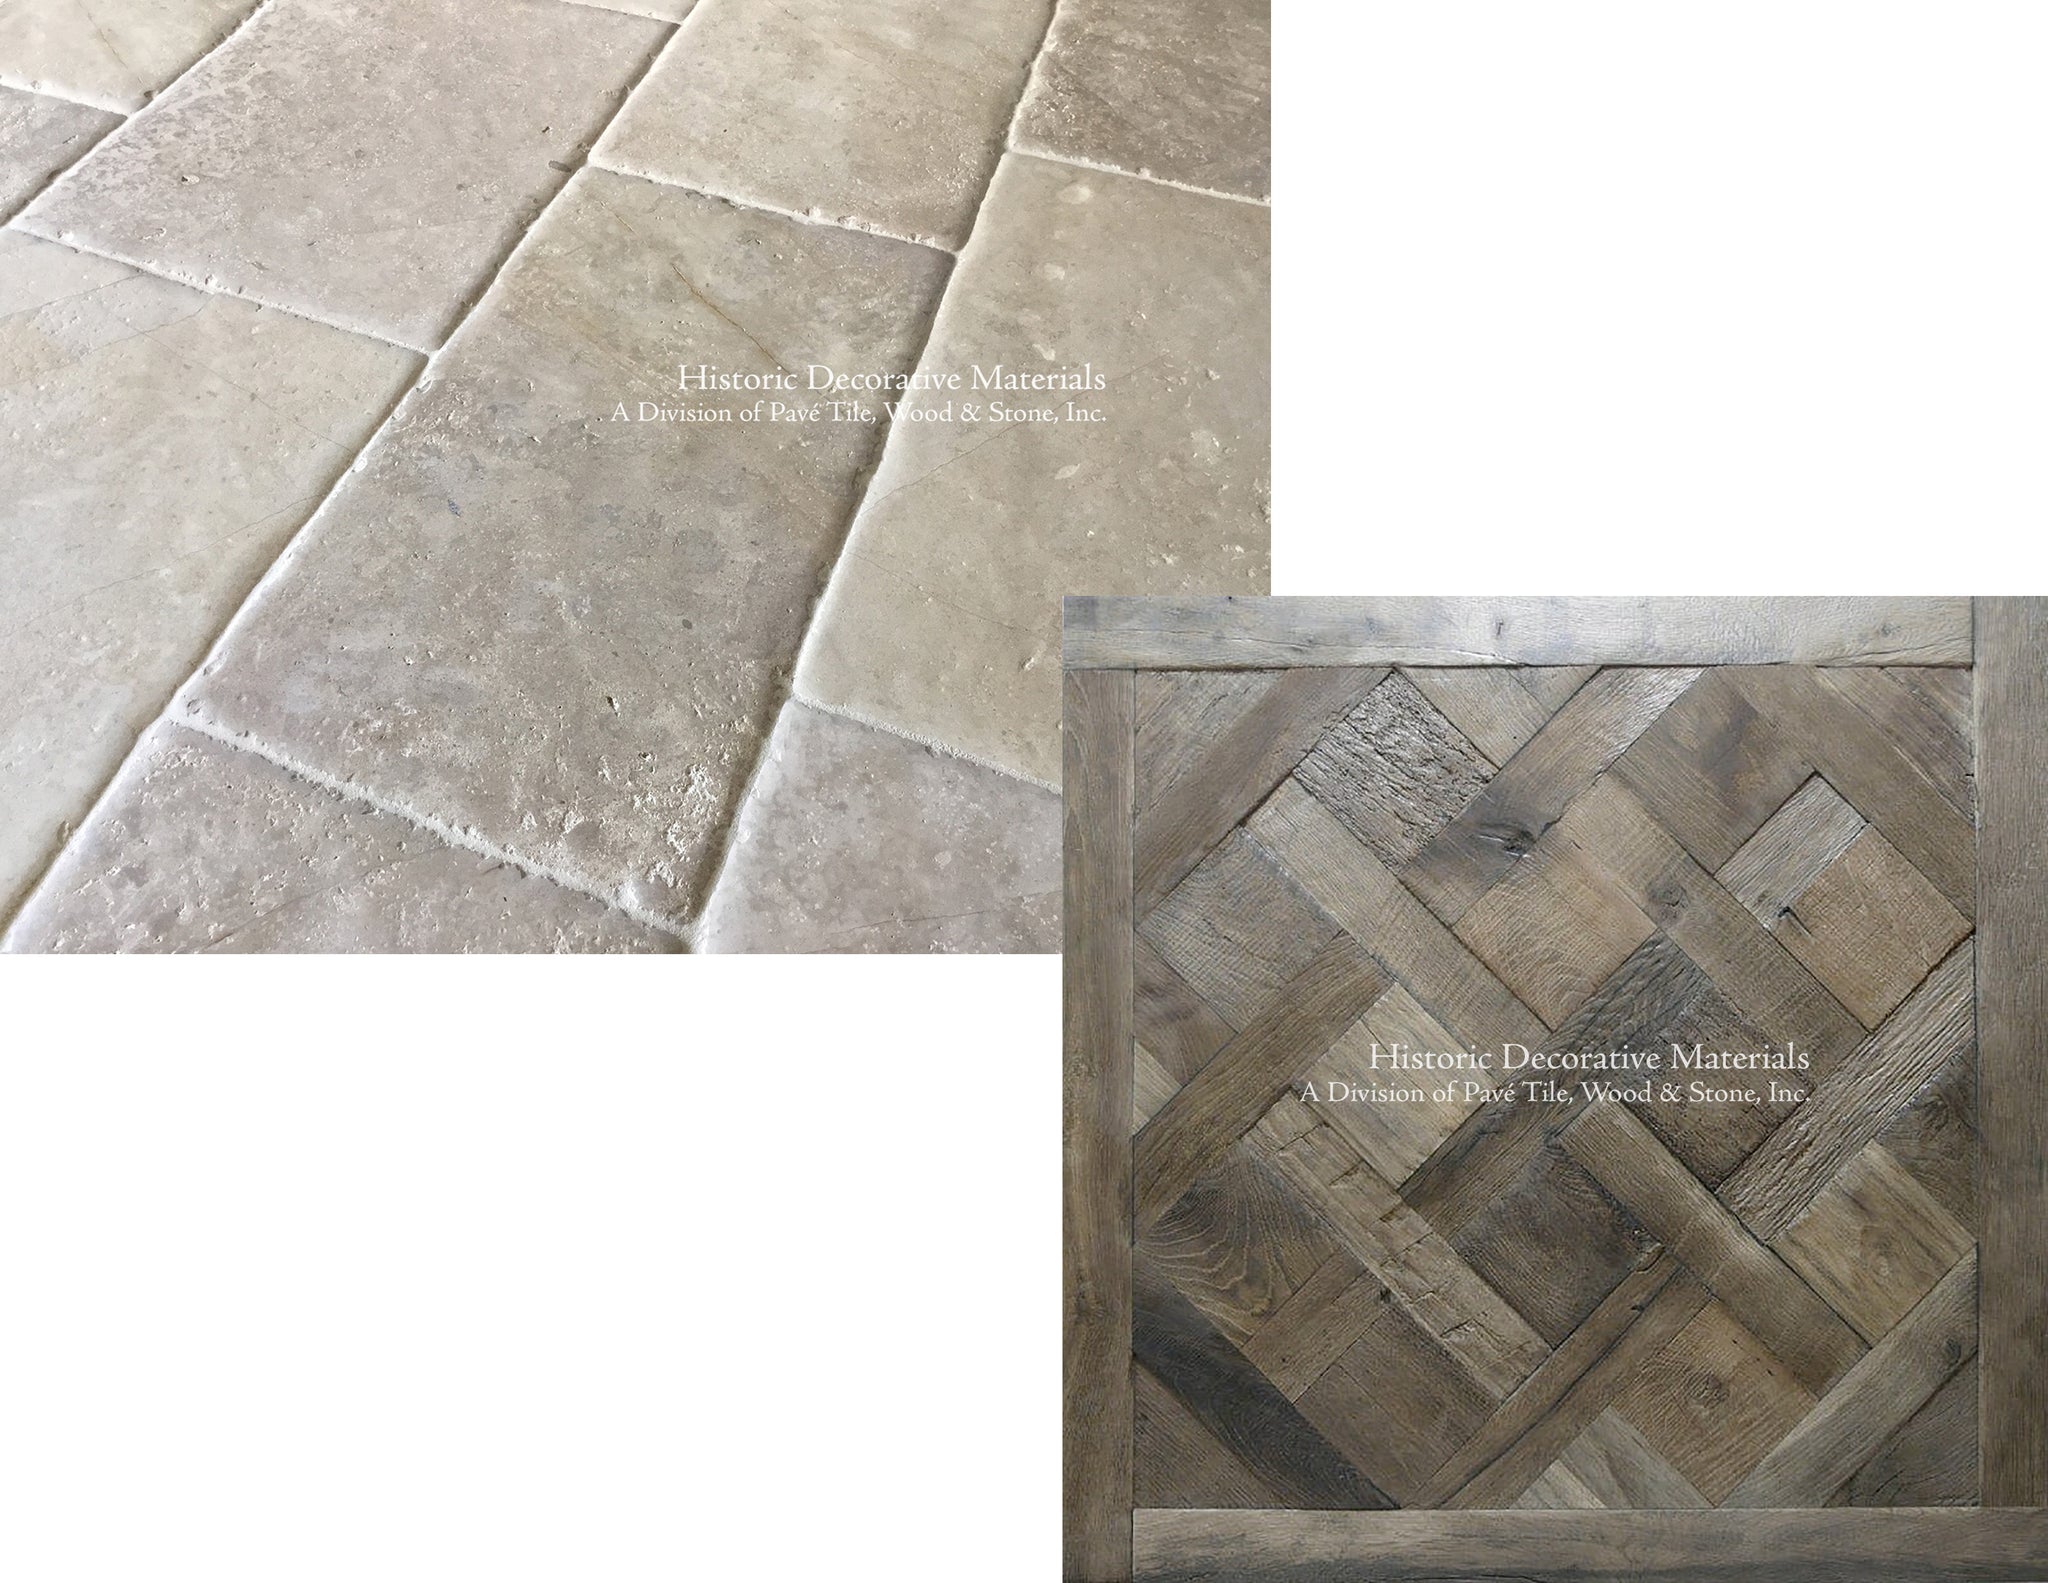 French Limestone Flooring and French Oak Flooring in Parquet de Versailles Pattern